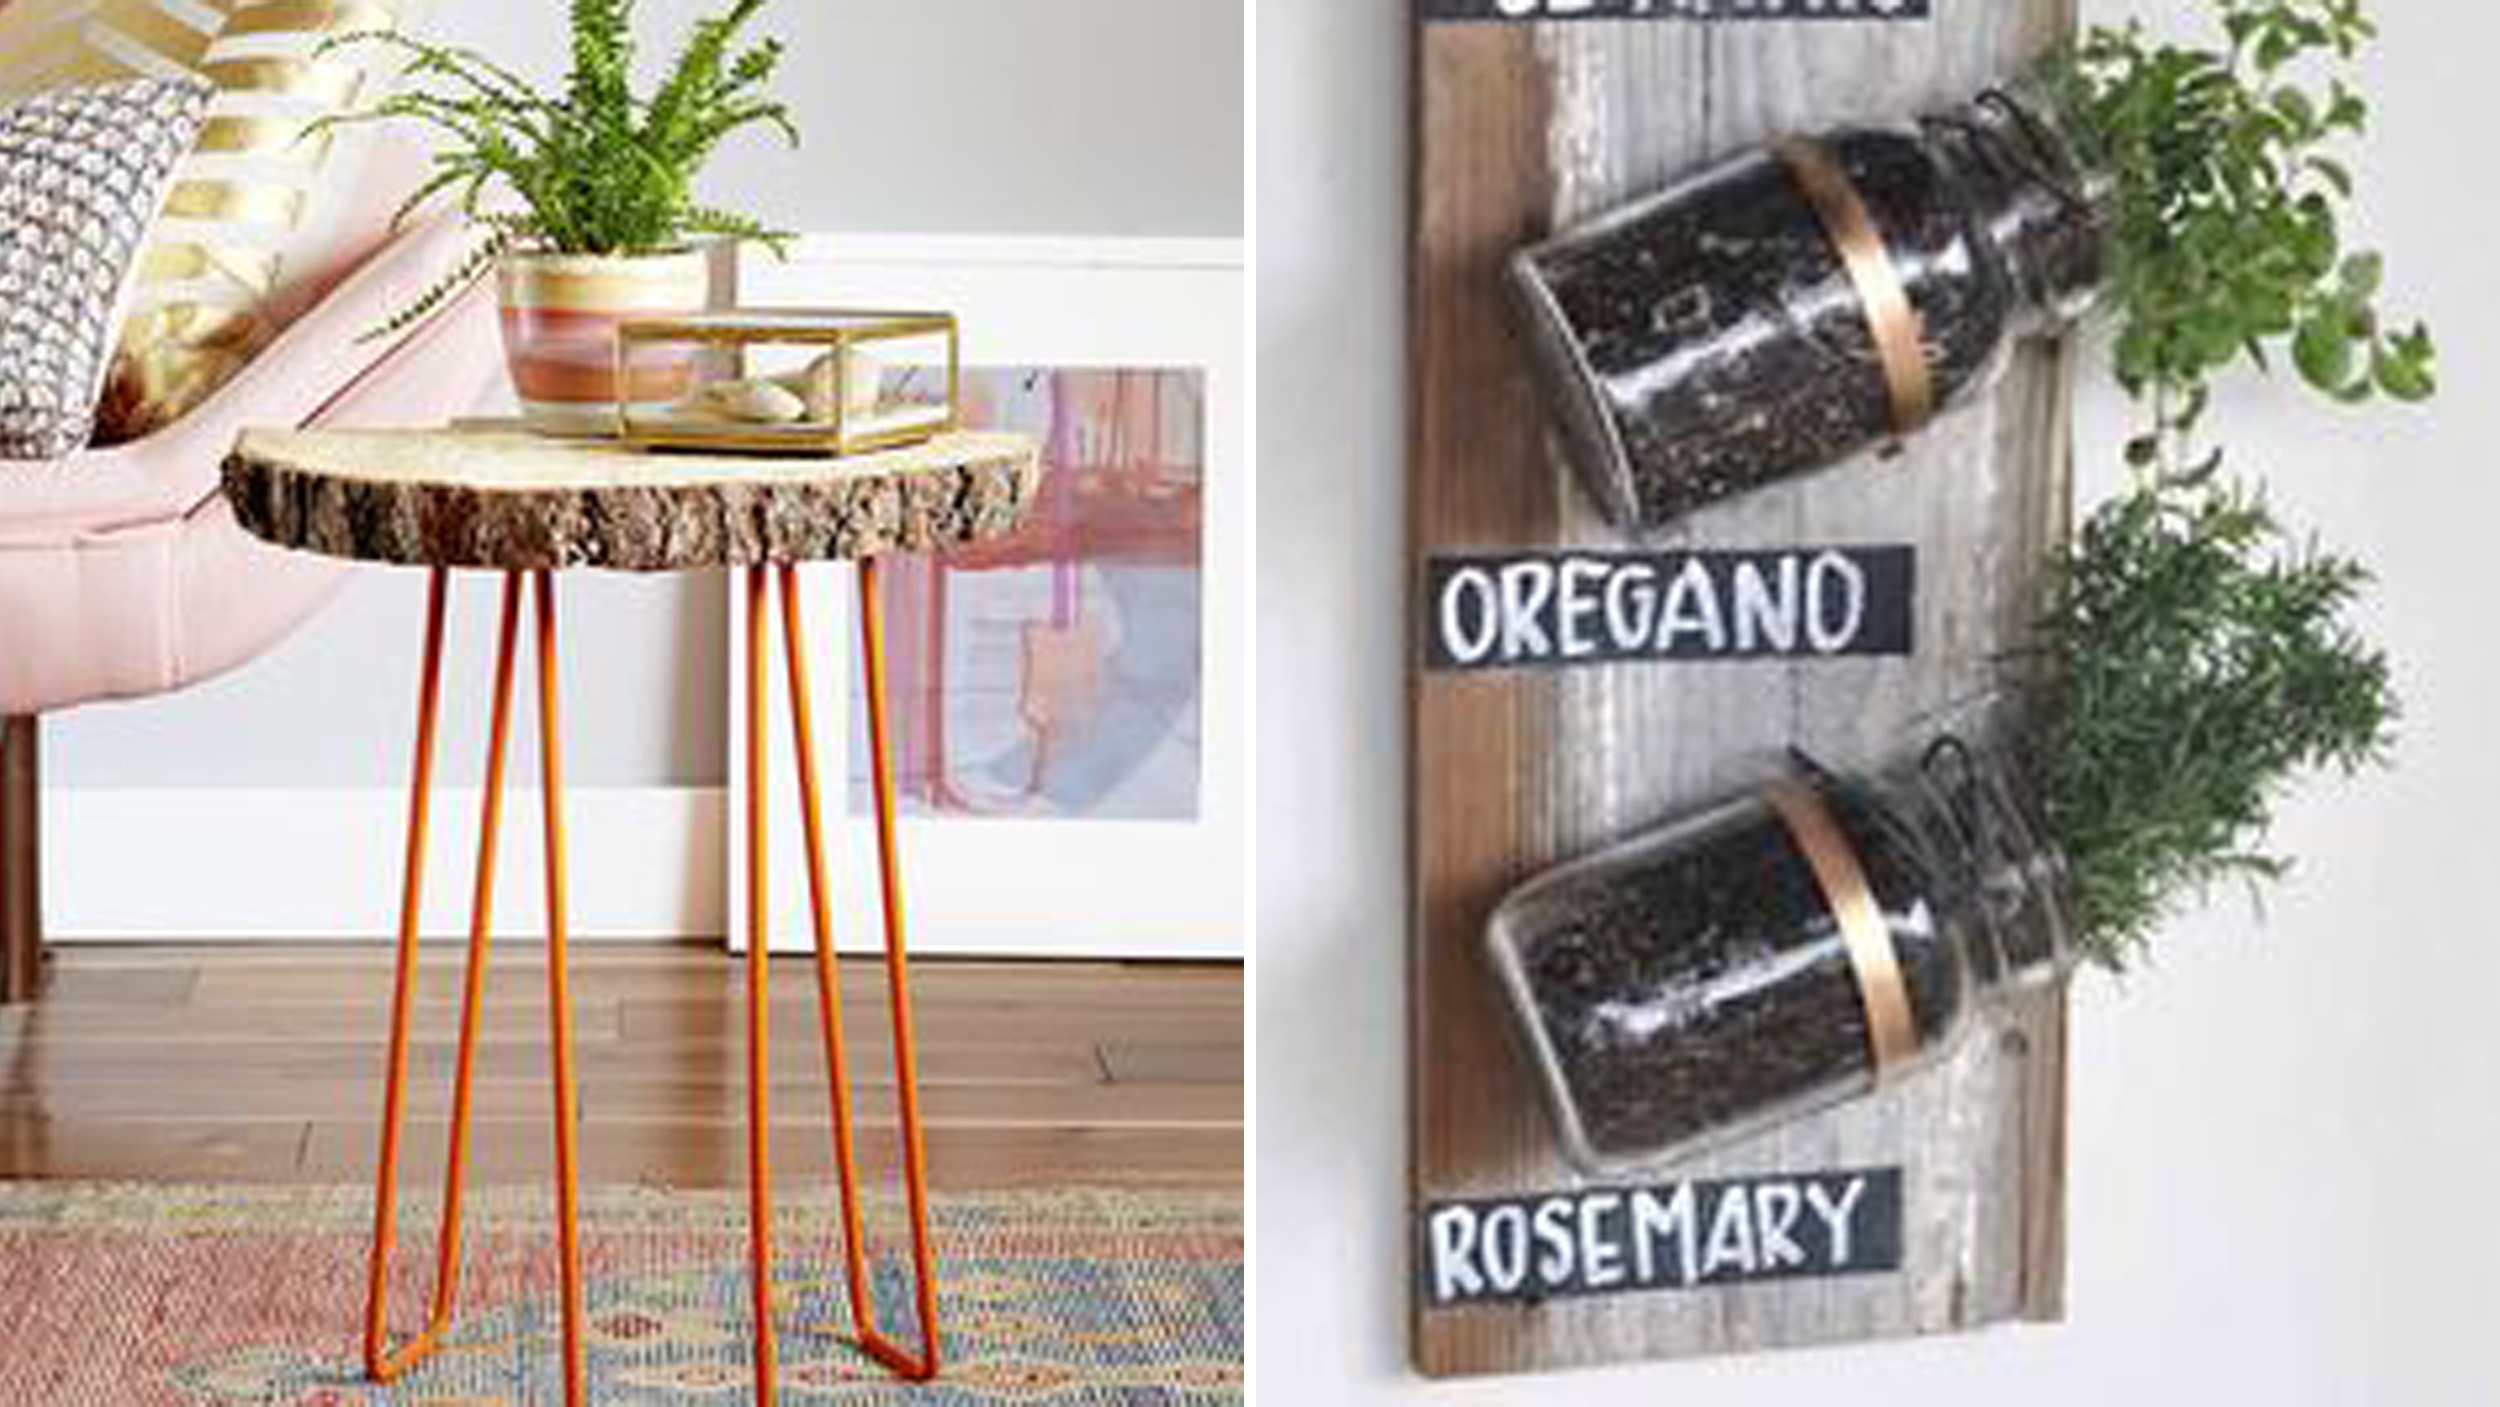 Pinterest reveals 3 home trends to expect in 2015 - TODAY.com